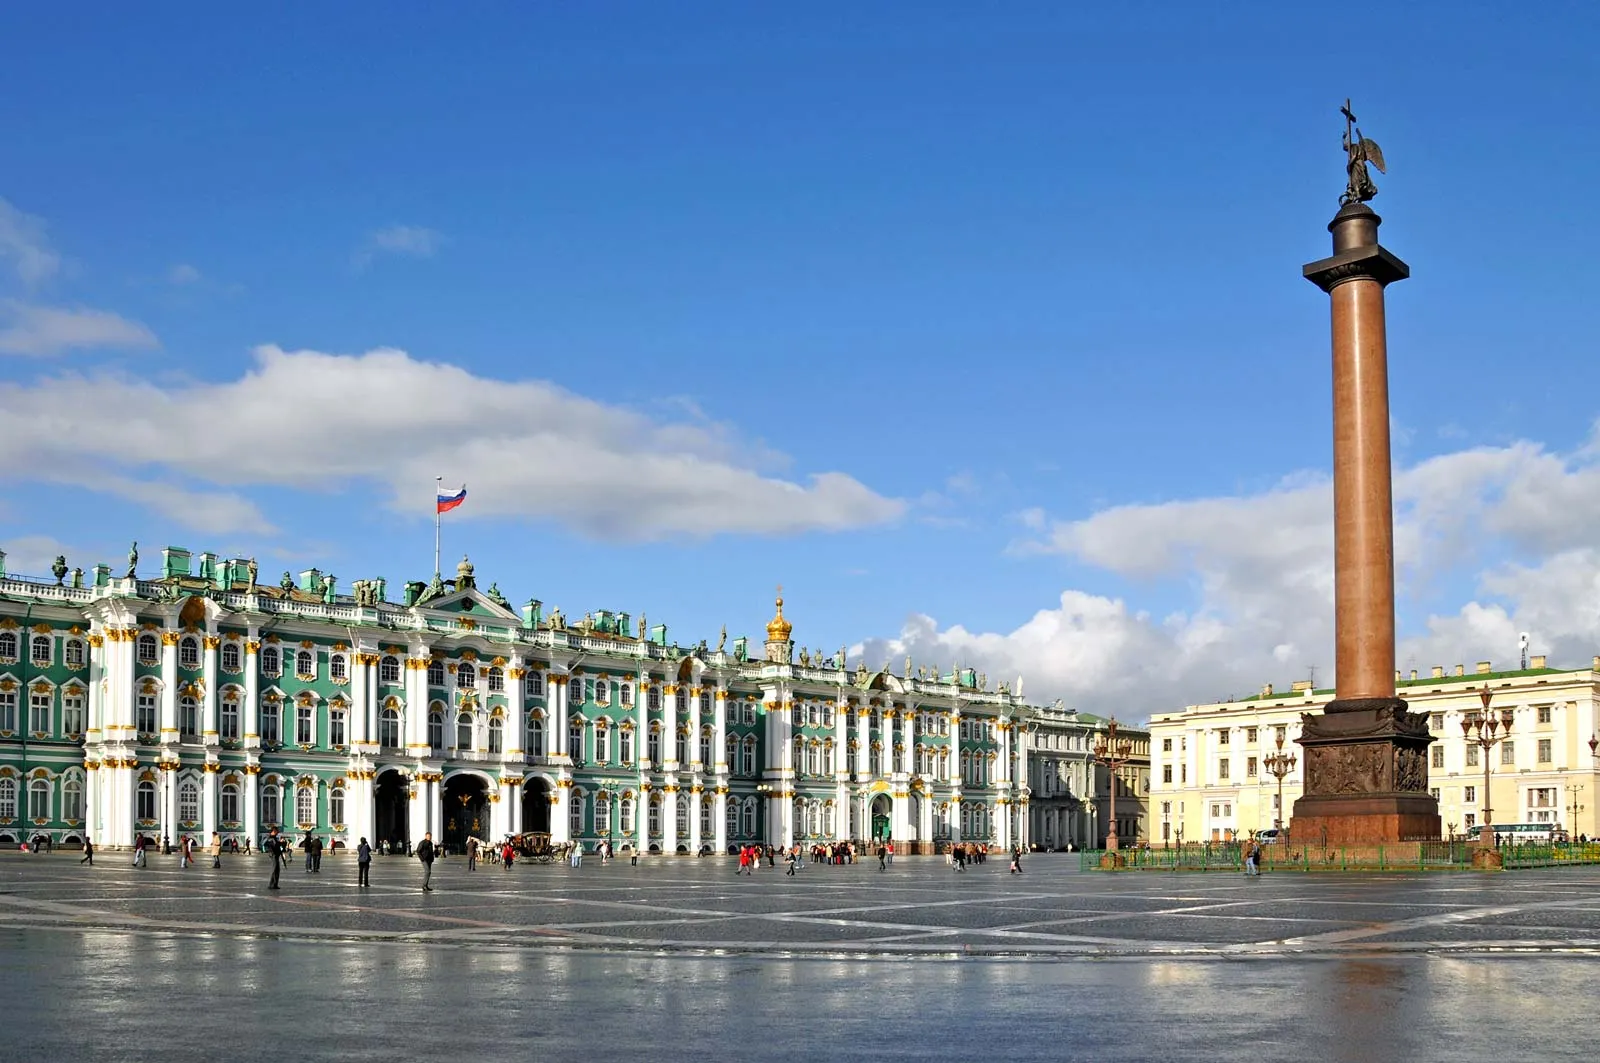 Winter Palace, St. Petersburg, Russia